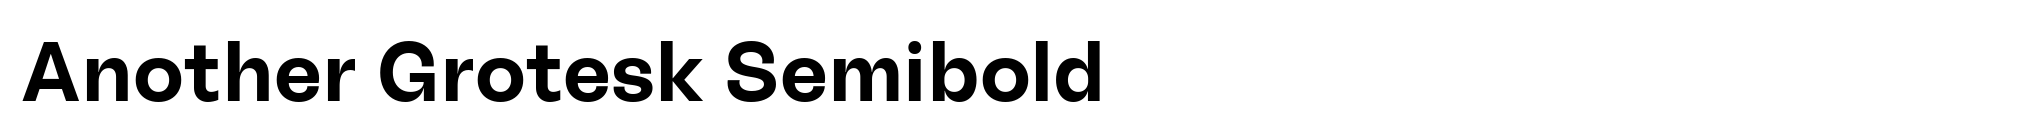 Another Grotesk Semibold image